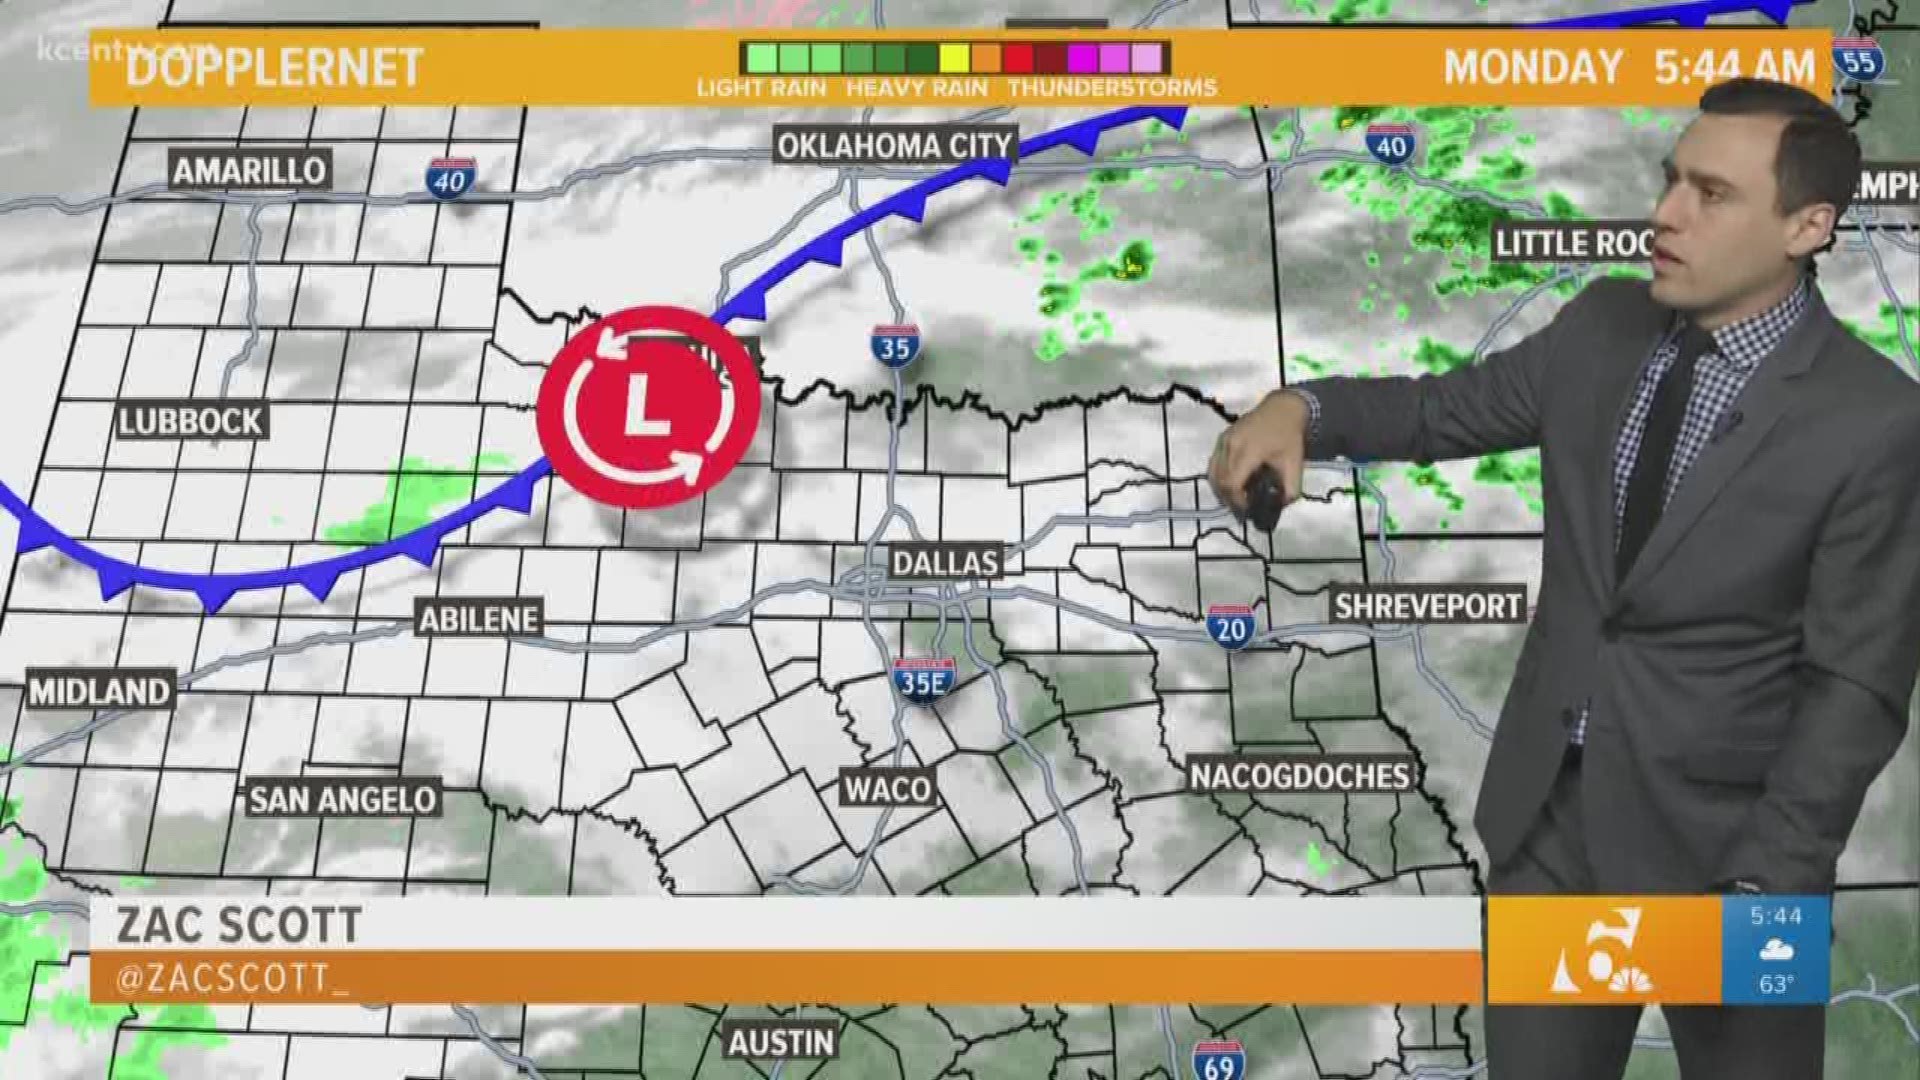 Your local weather forecast, updated daily by the KCEN Weather Team.